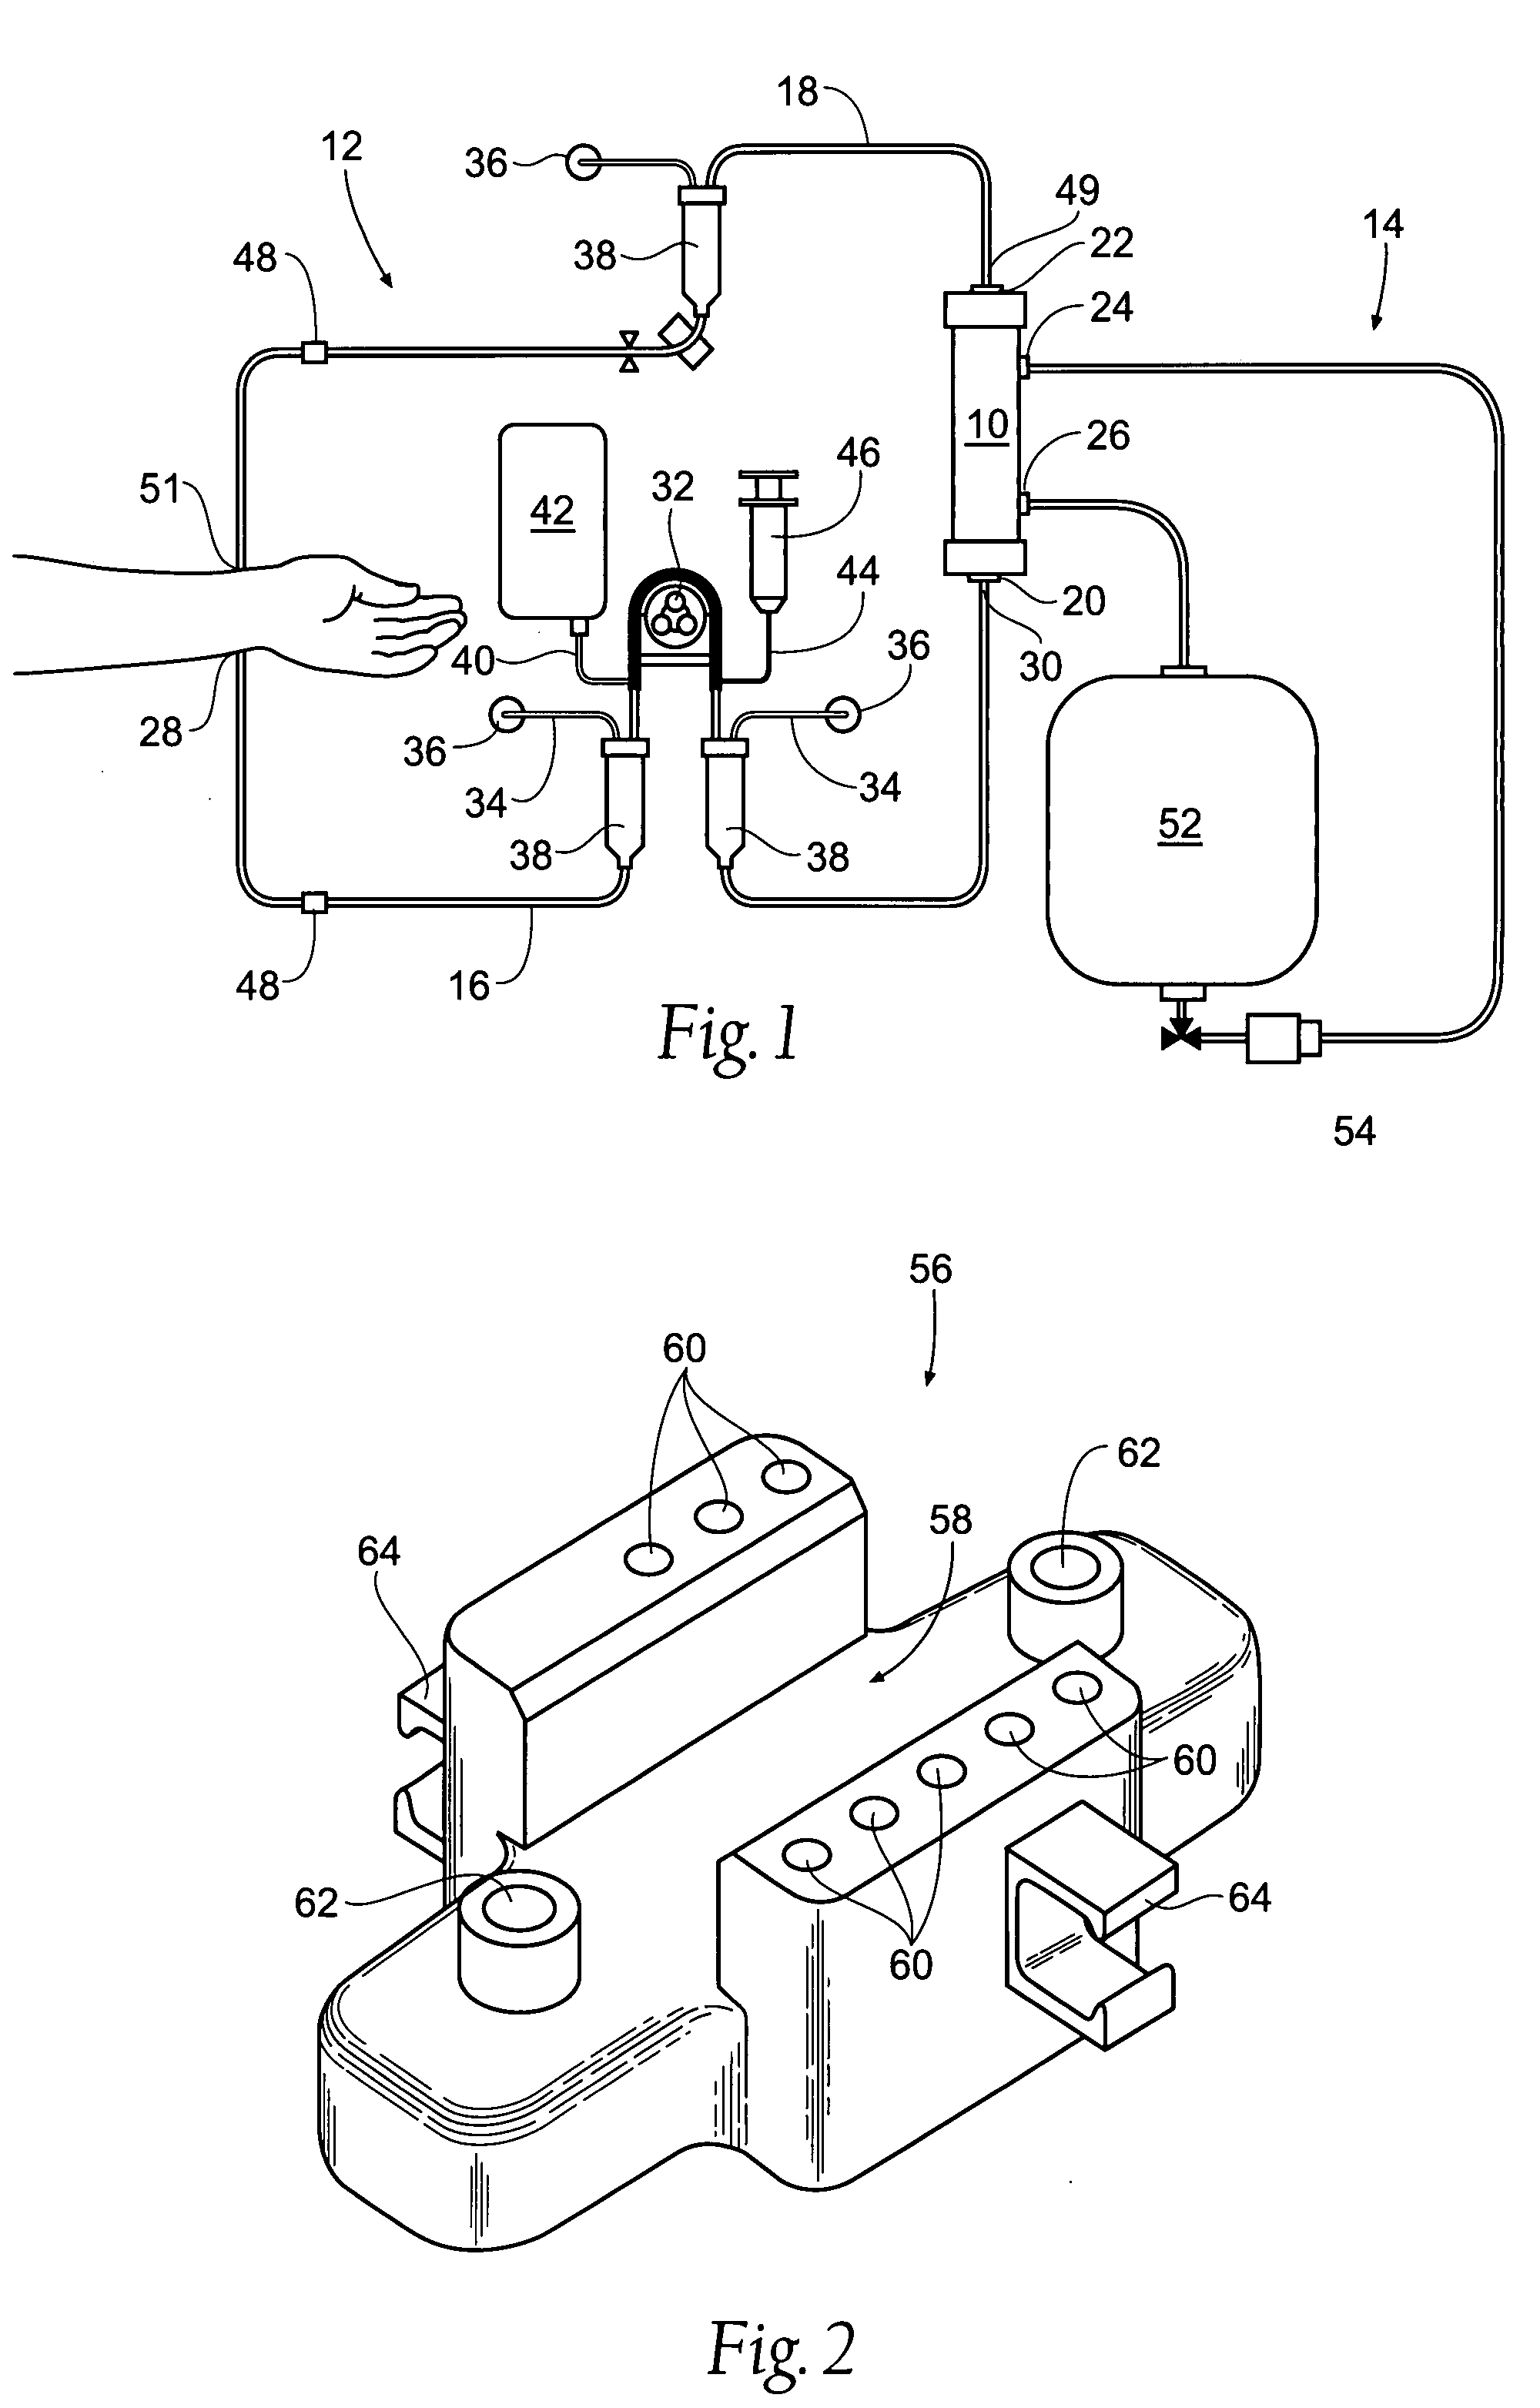 Devices, systems, and methods for cleaning, disinfecting, rinsing, and priming blood separation devices and associated fluid lines